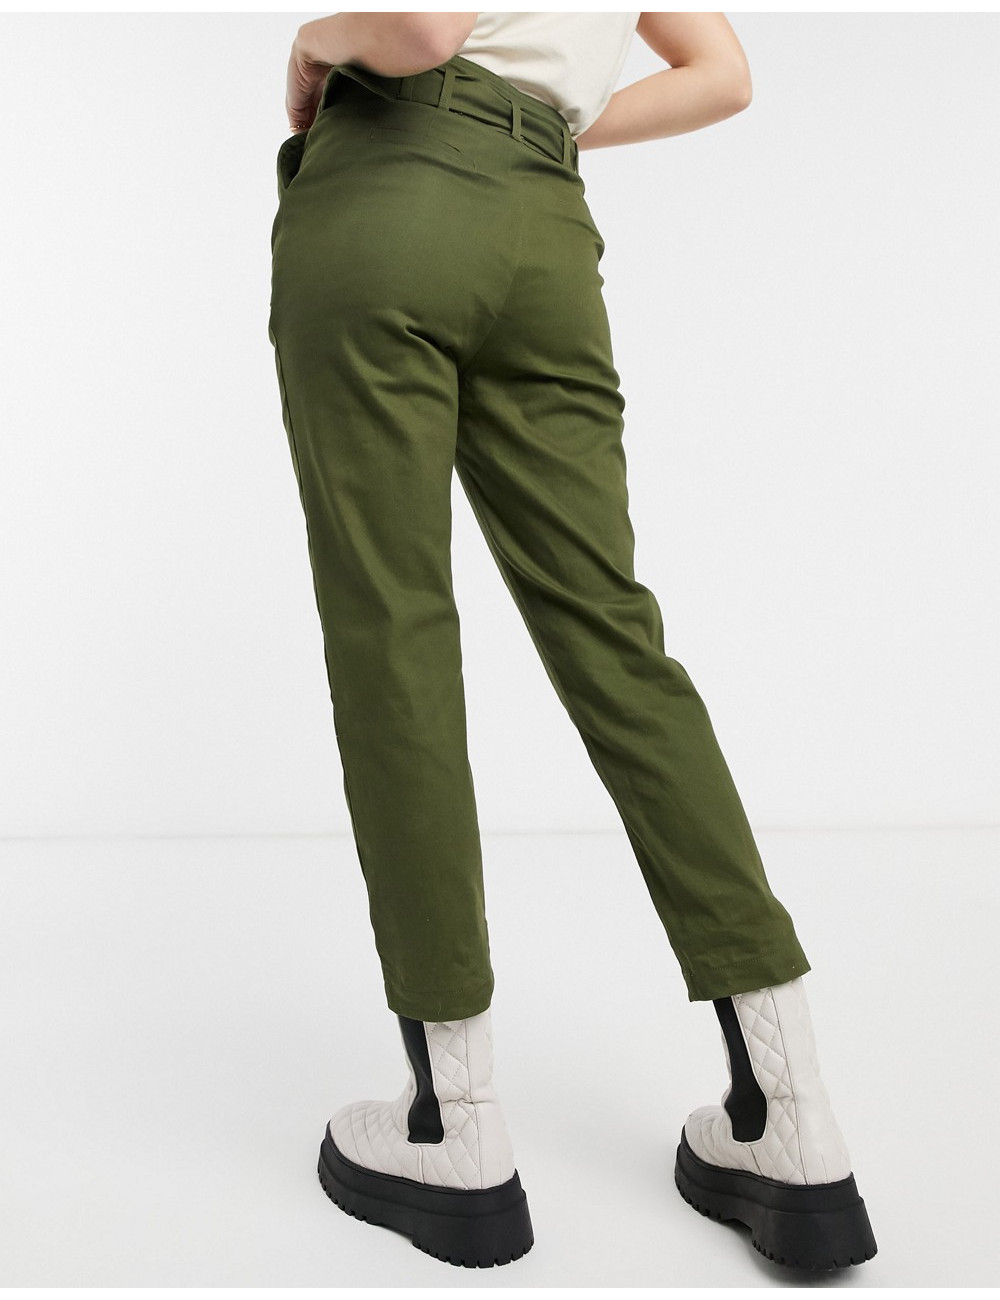 Moon River belted trousers...